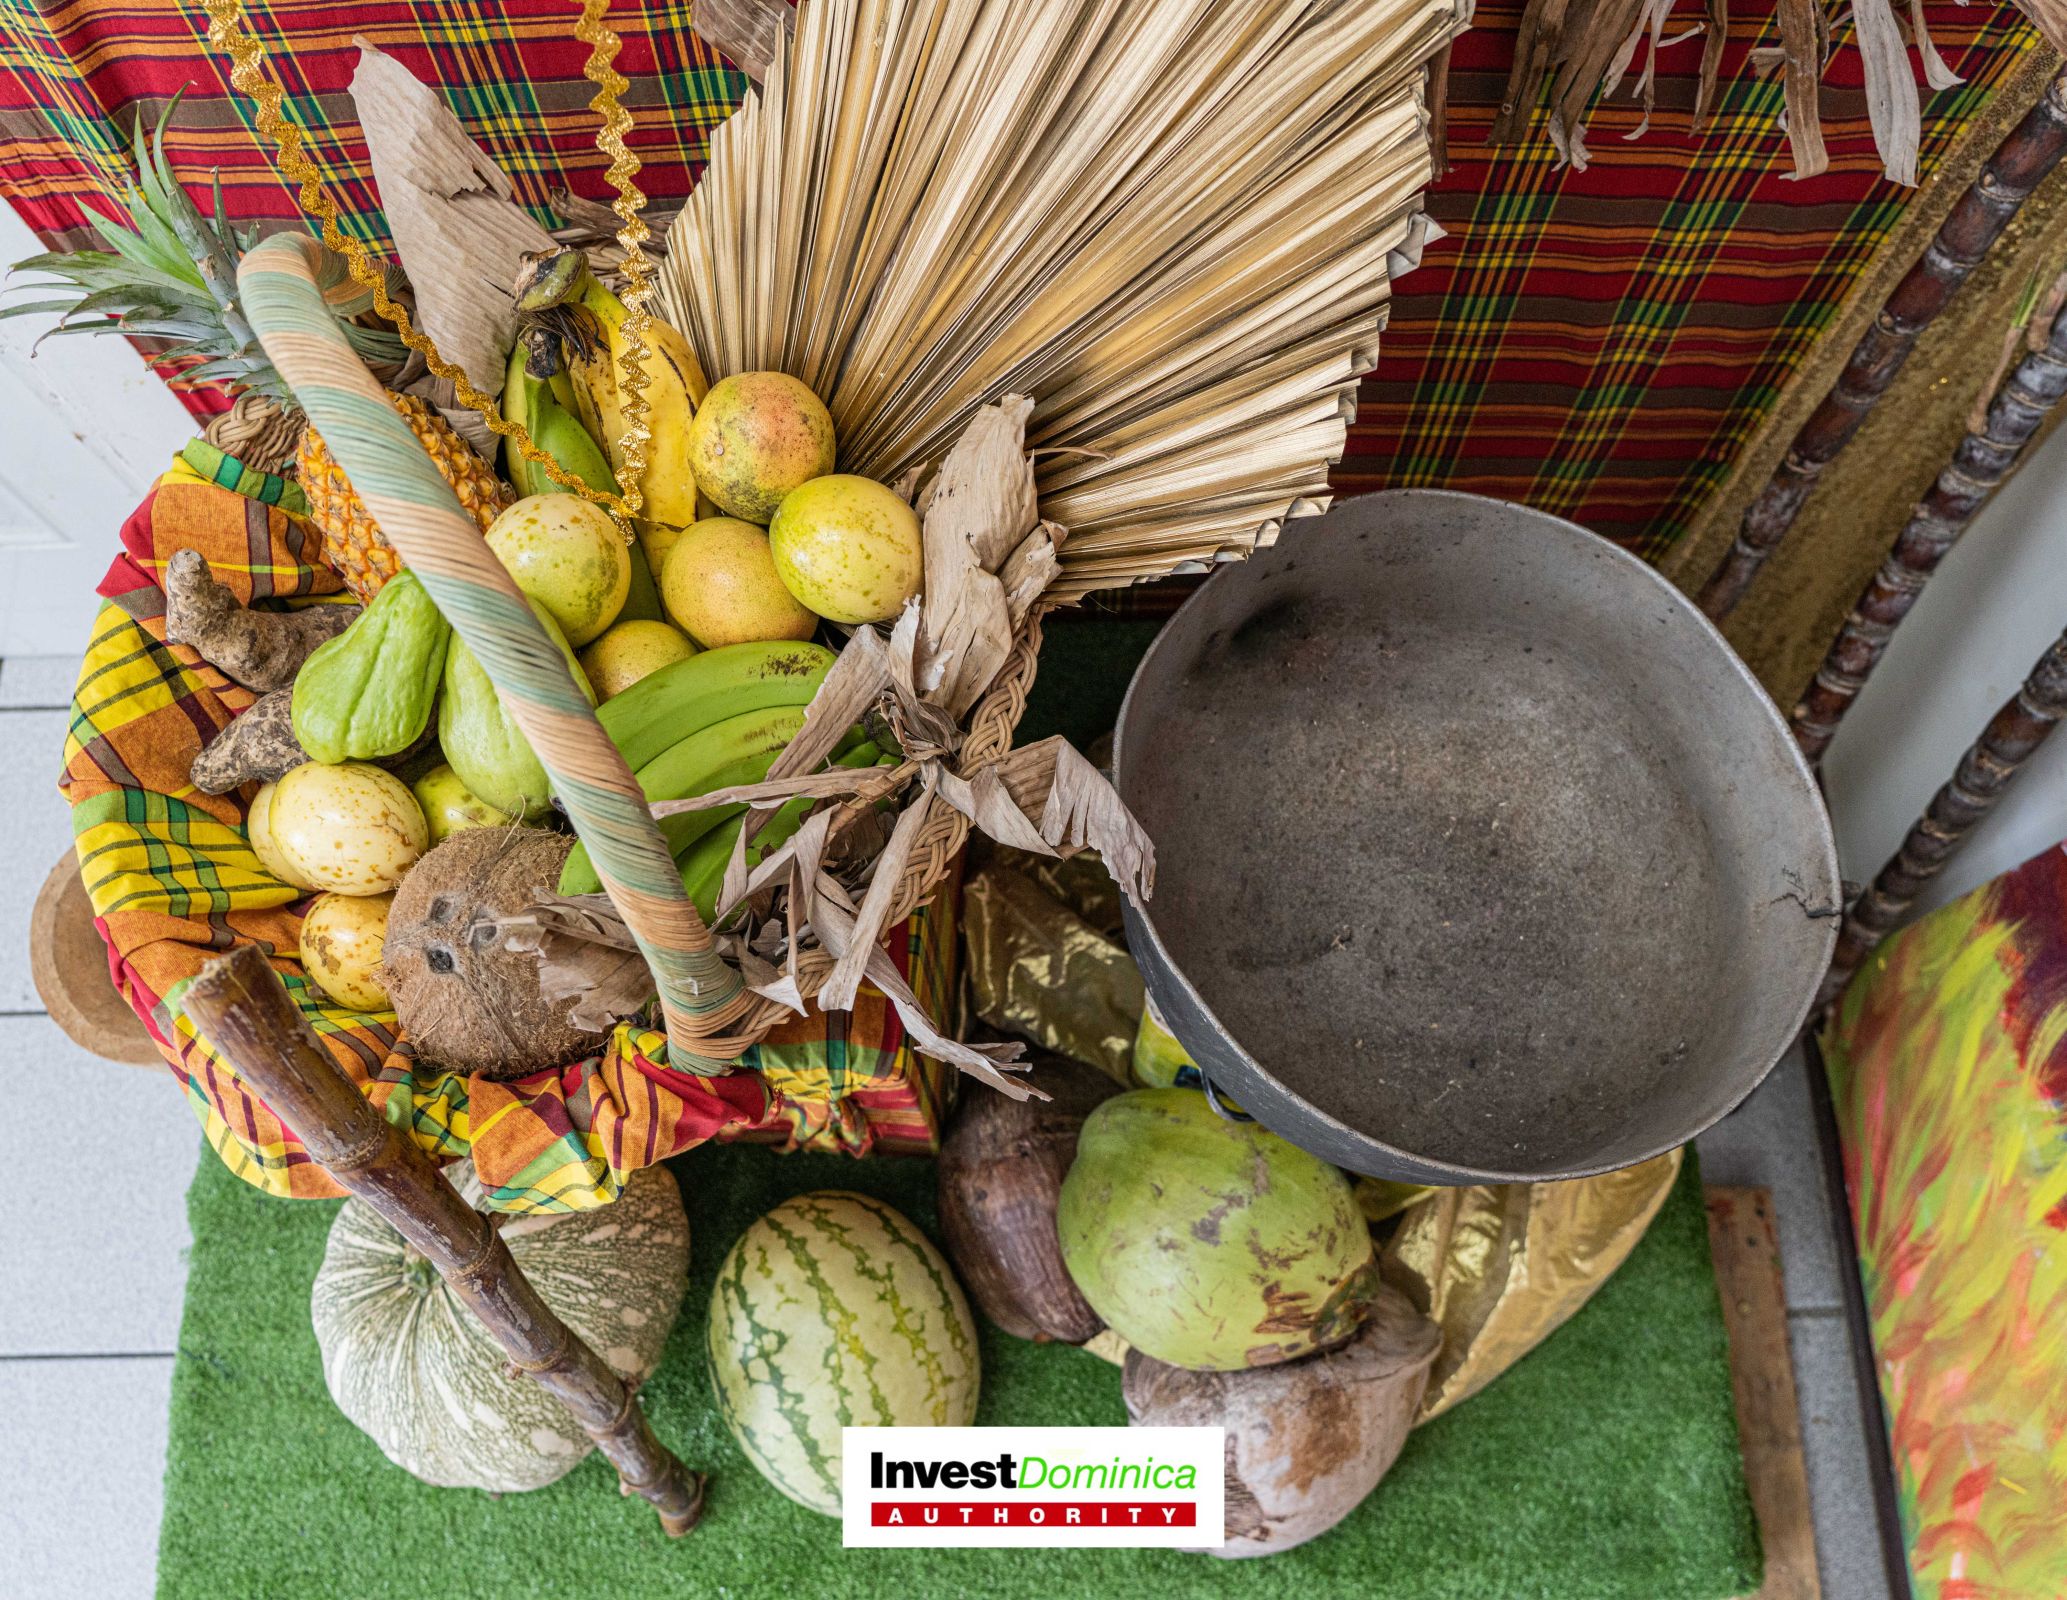 Click the Top reasons why Dominica's culture makes it ideal for investment Slide Photo to Open